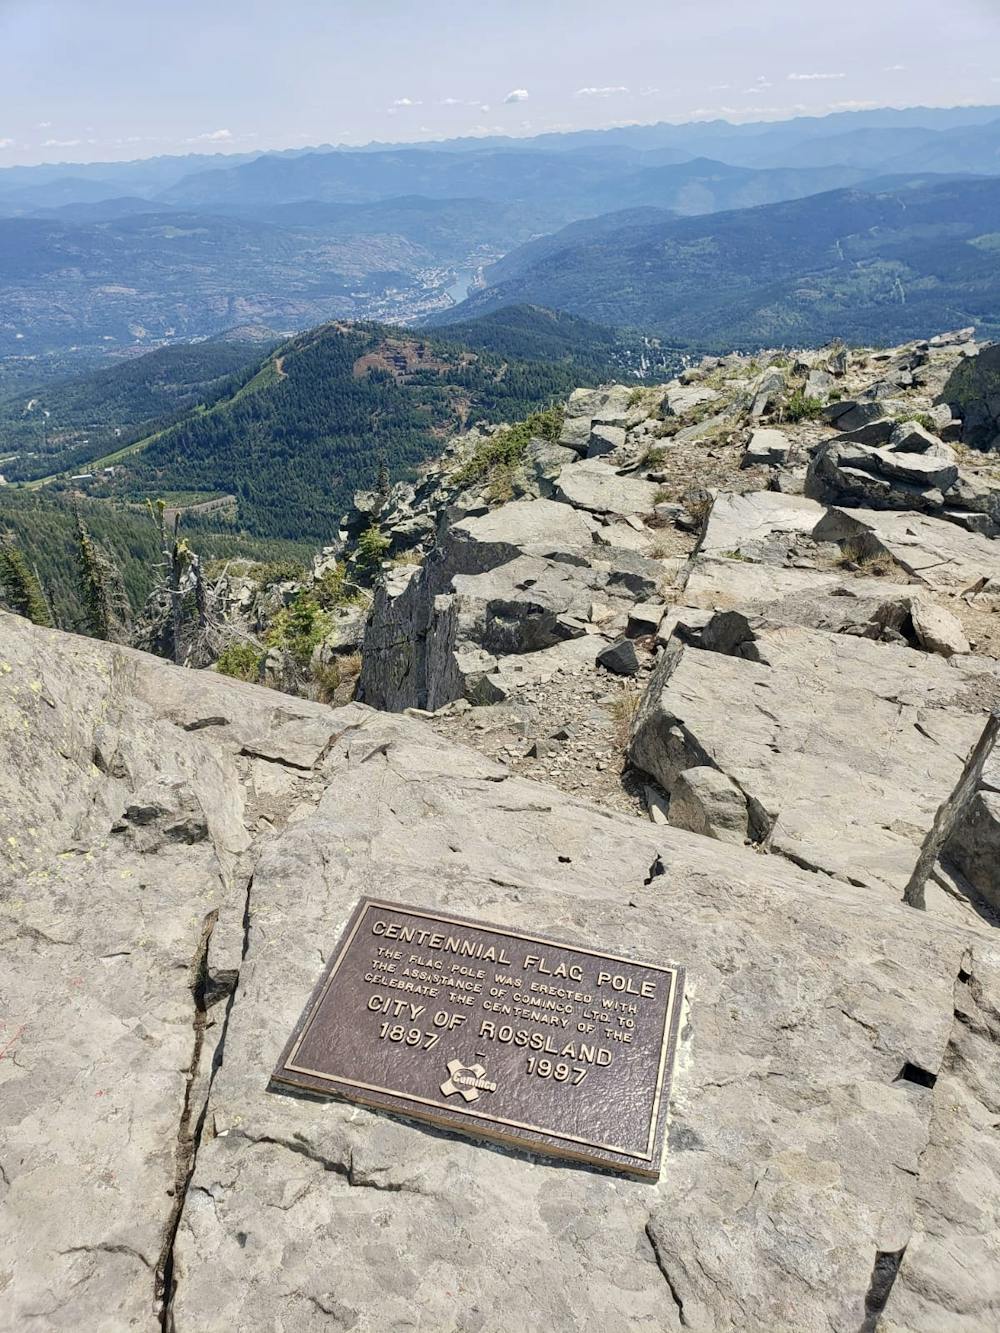 A bit of history on the summit